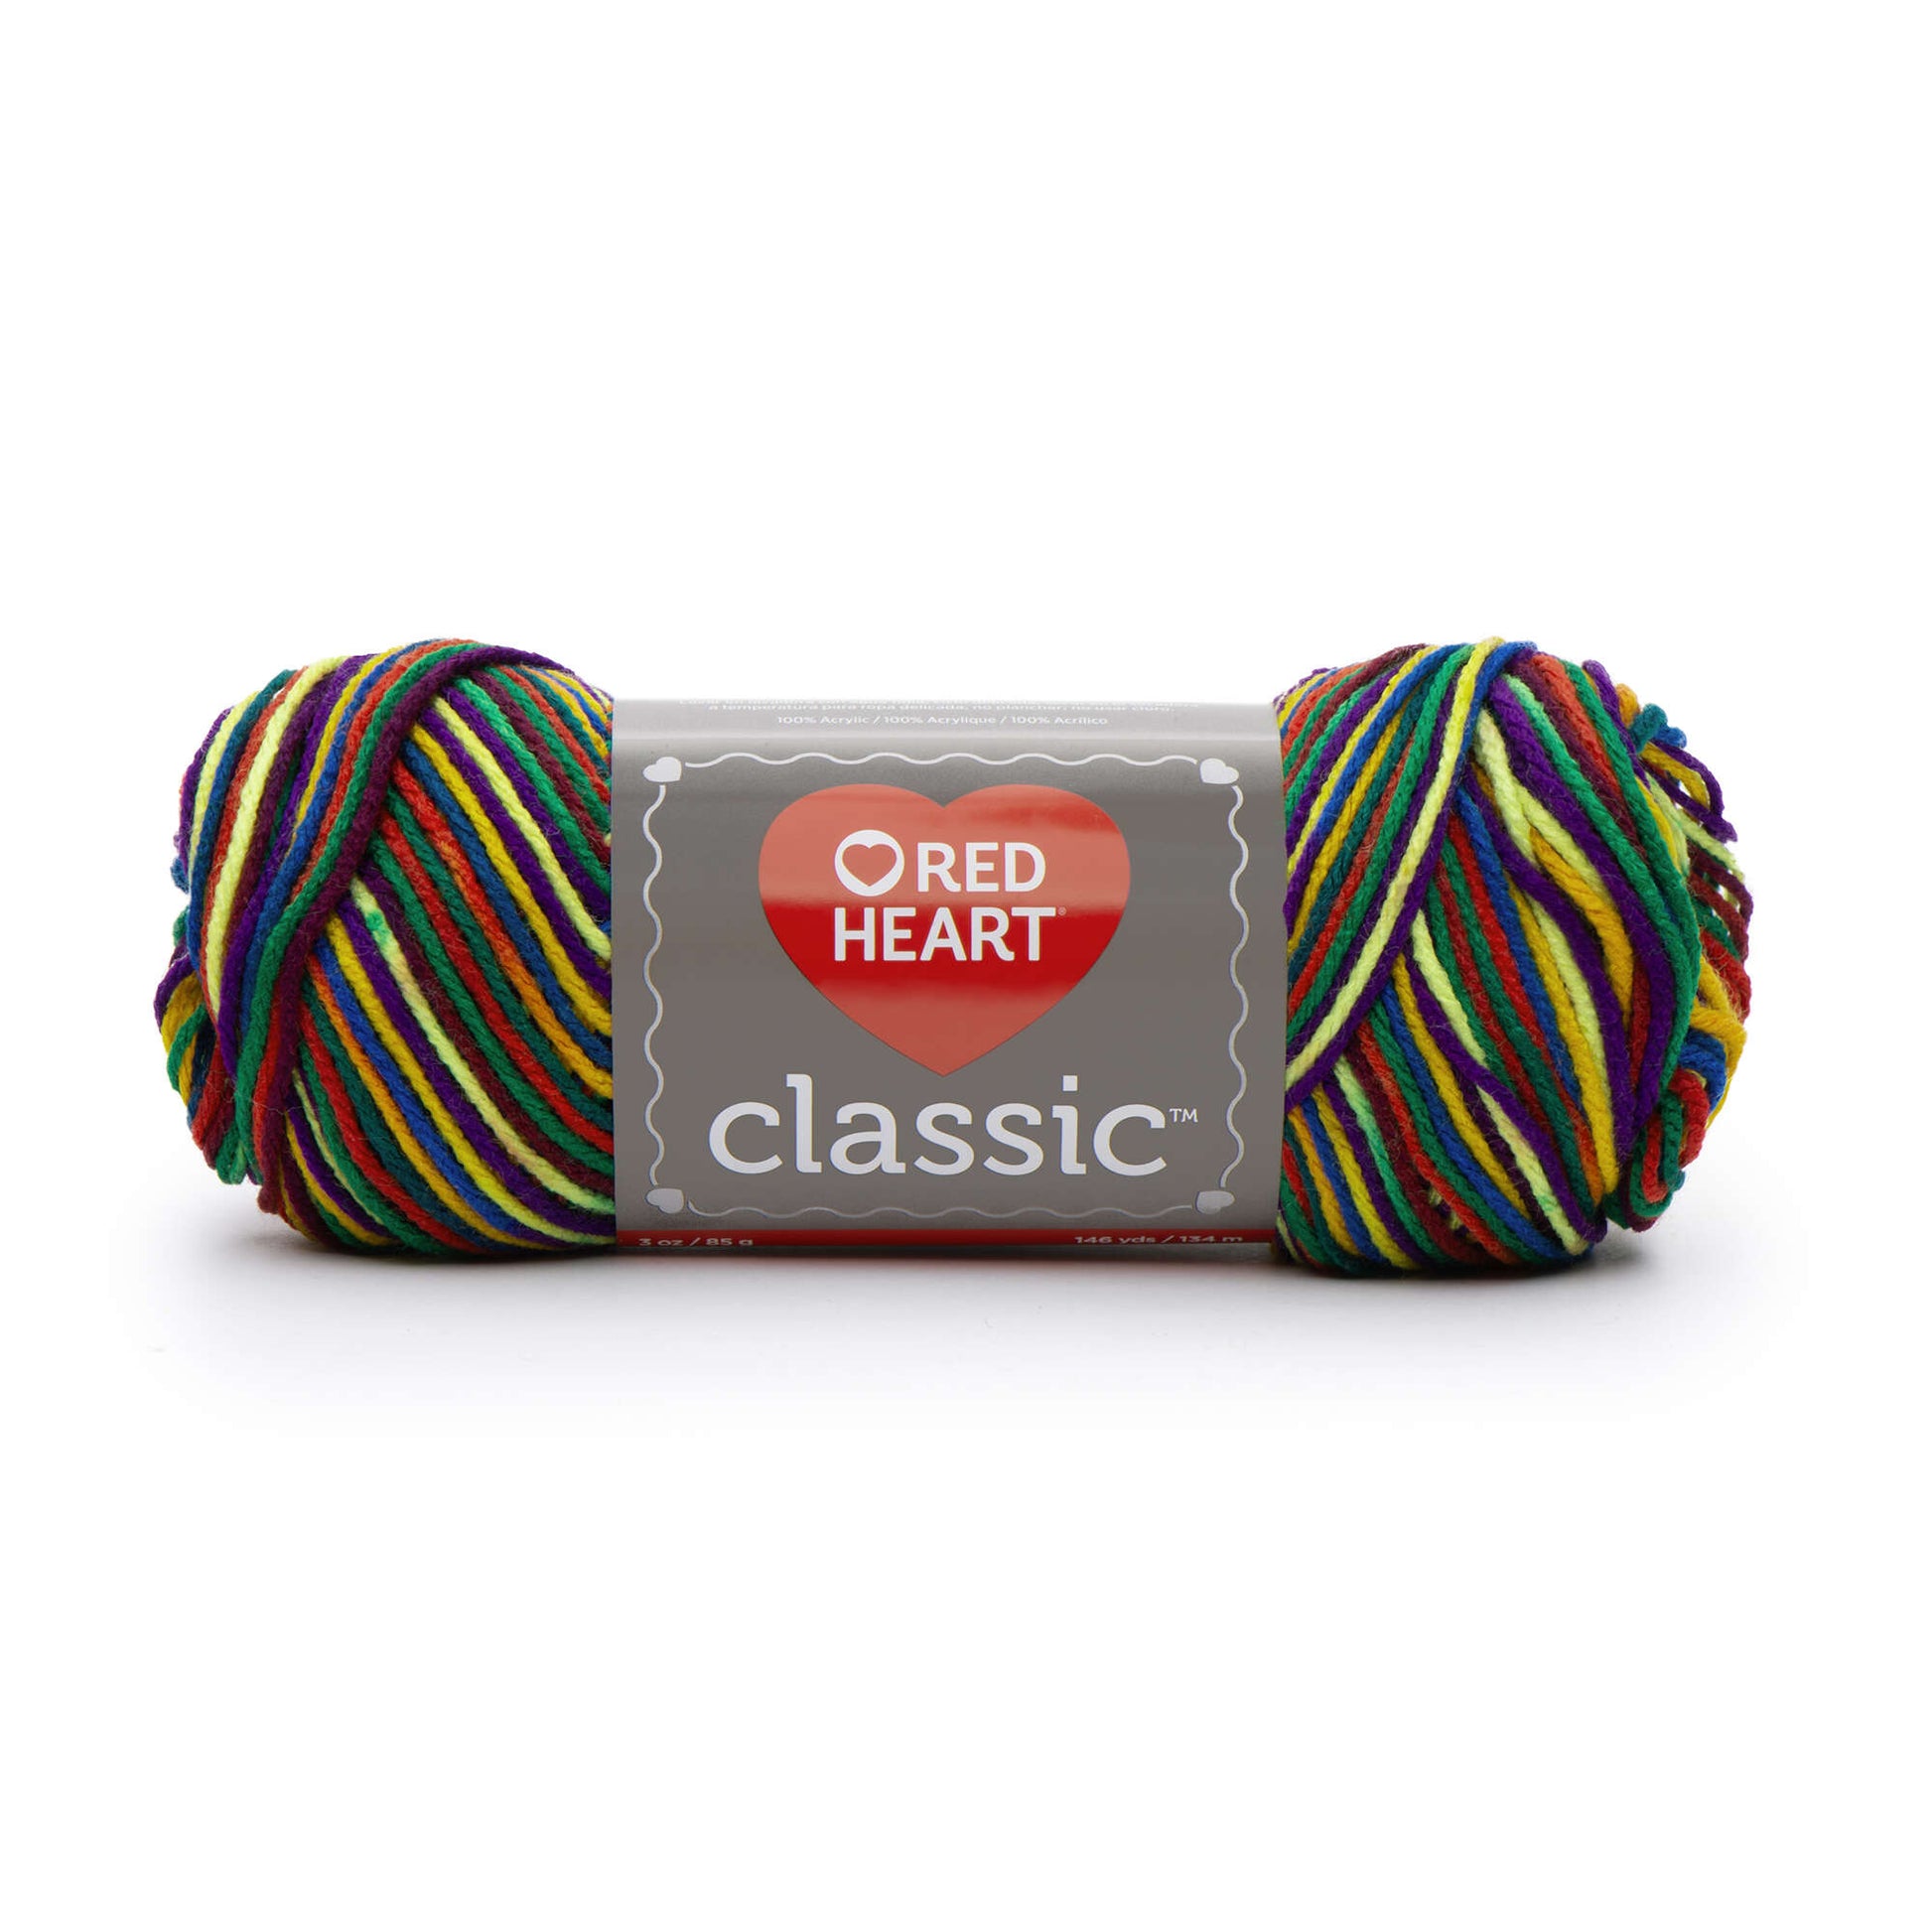 Red Heart Classic Yarn - Clearance shades Mexicana